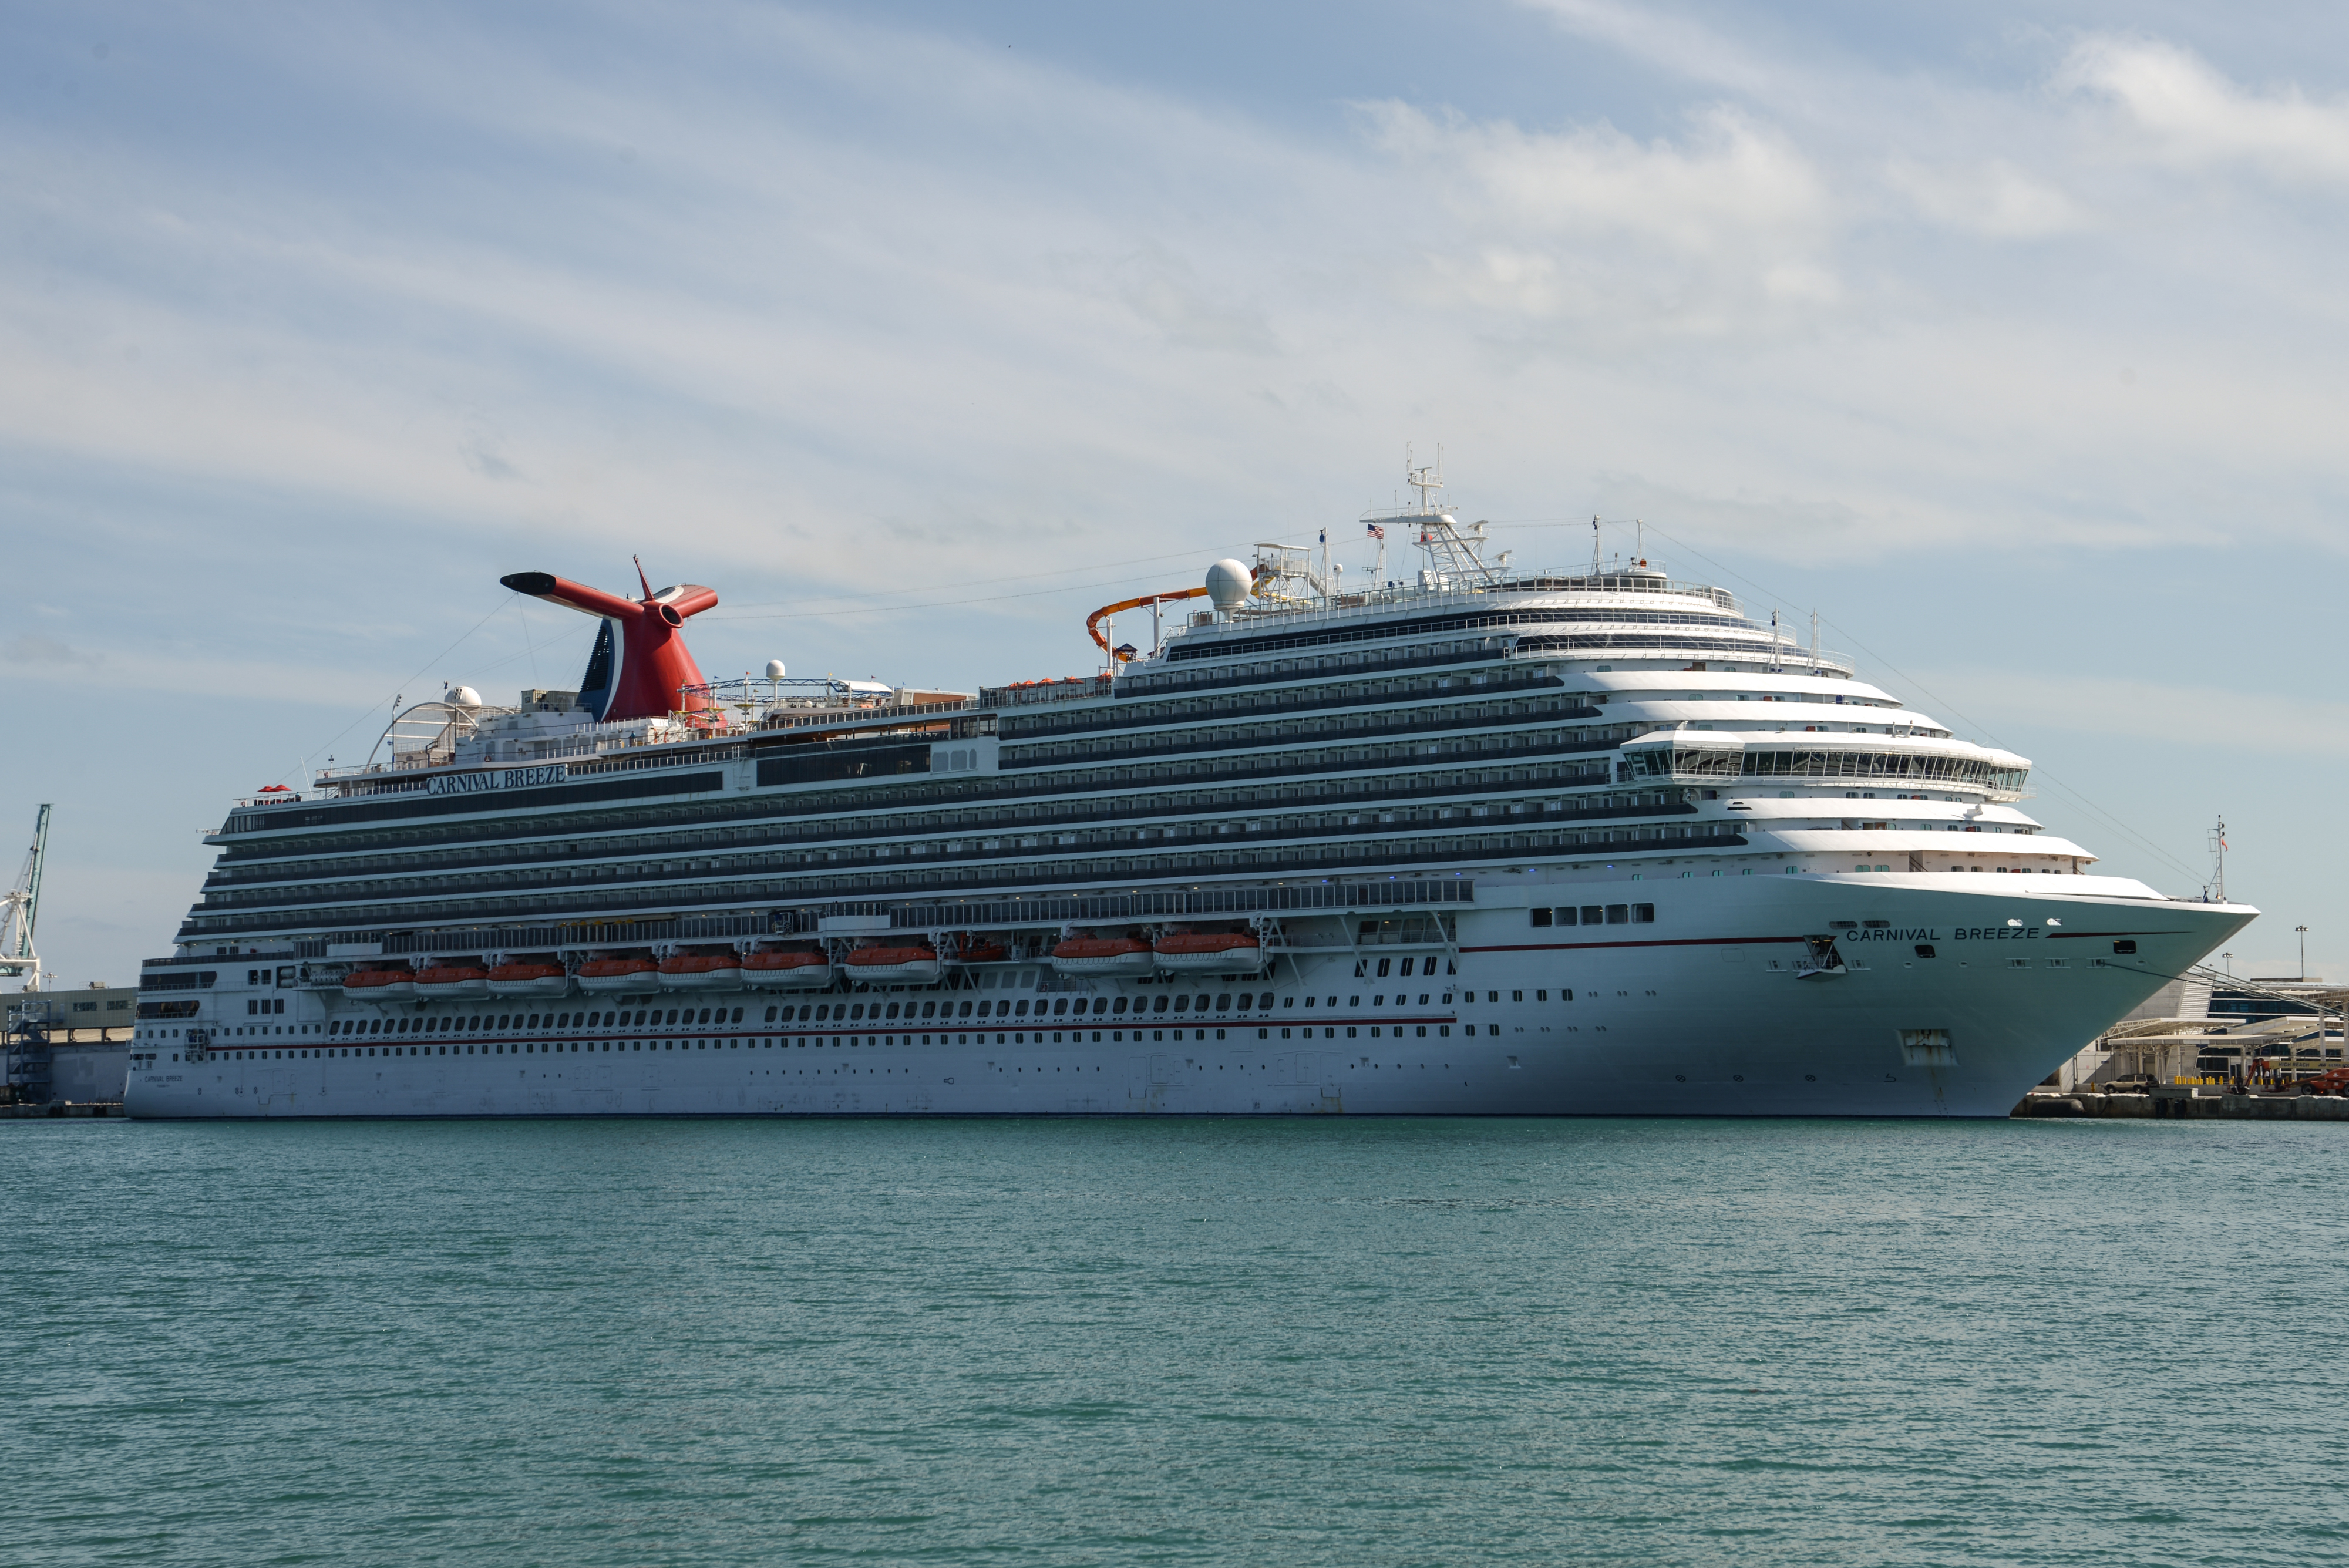 Carnival's Breeze cruise ship stands docked prior to departure in Miami, Florida on March 9, 2014. (Bloomberg—Bloomberg via Getty Images)